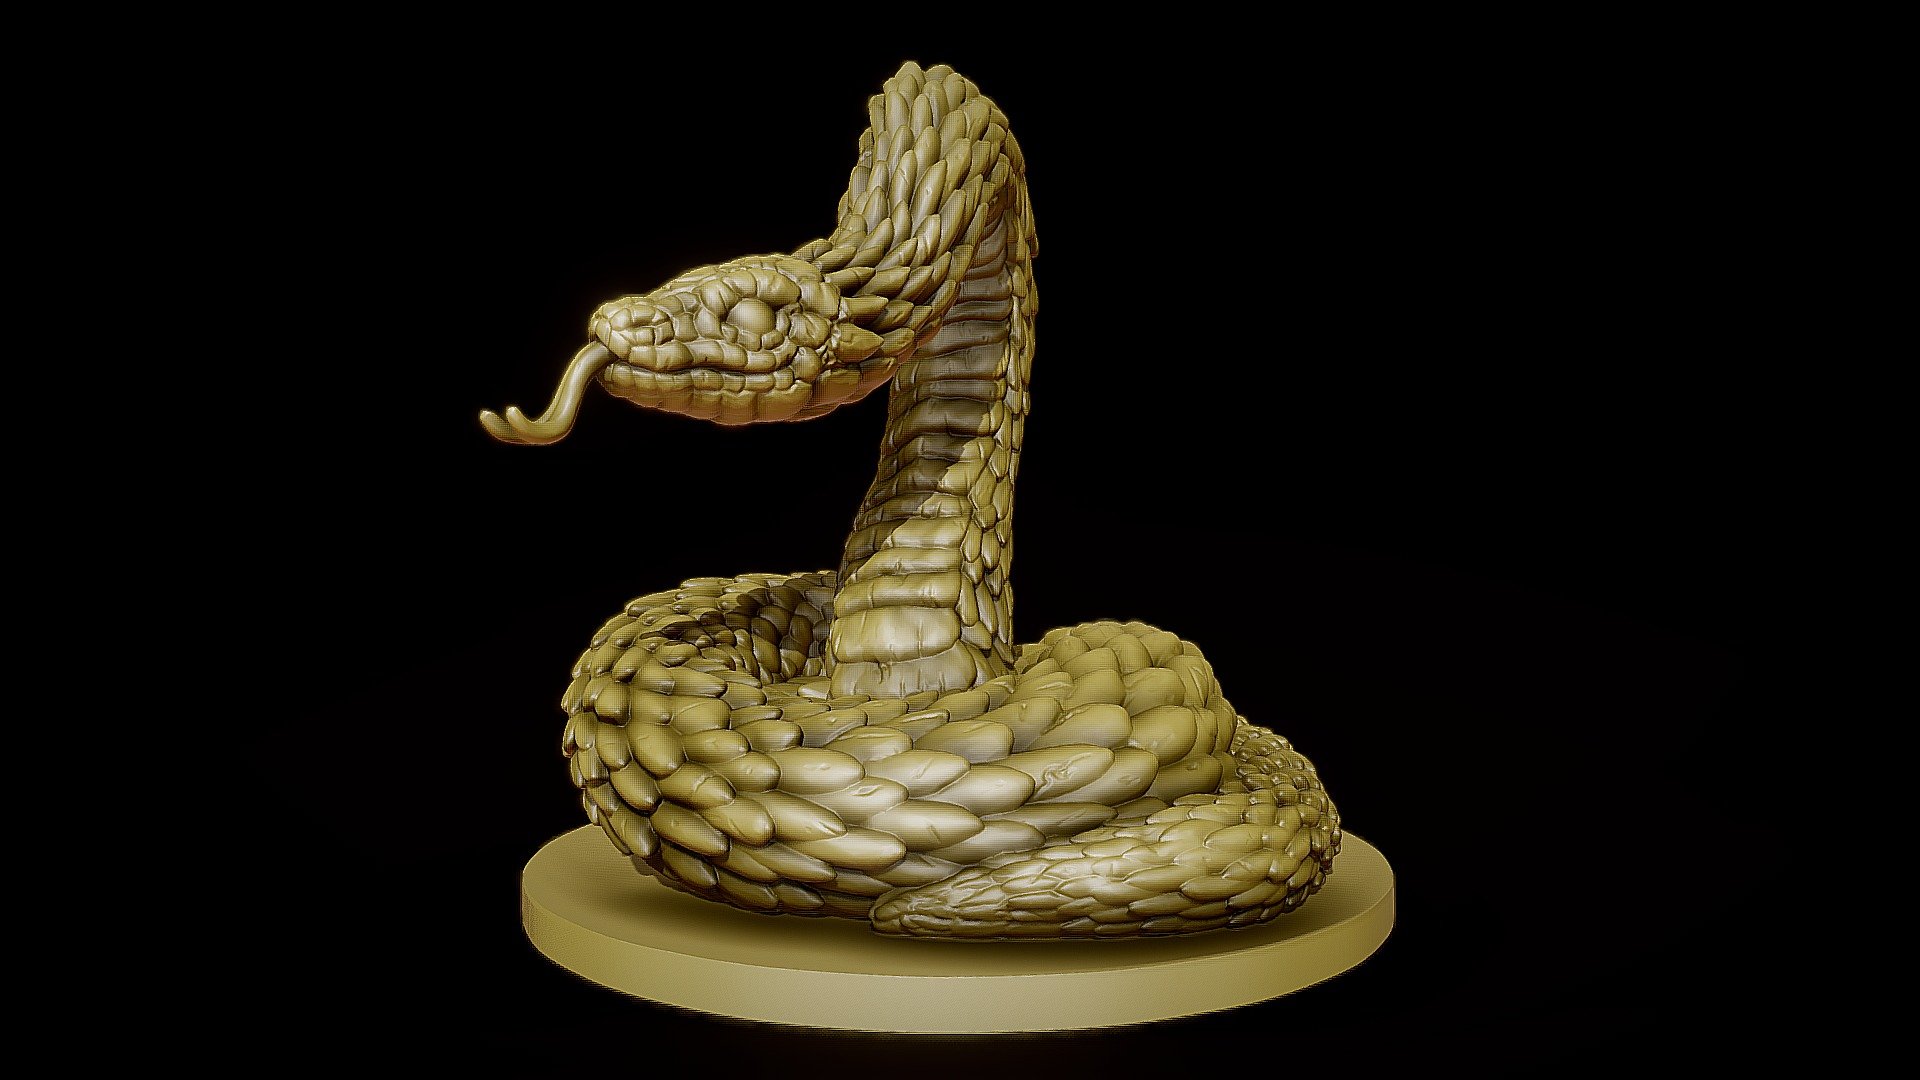 High poly 3d model of a Giant Snake created in Zbrush. Model watertight and can be printed. Additional stl file format 3d model